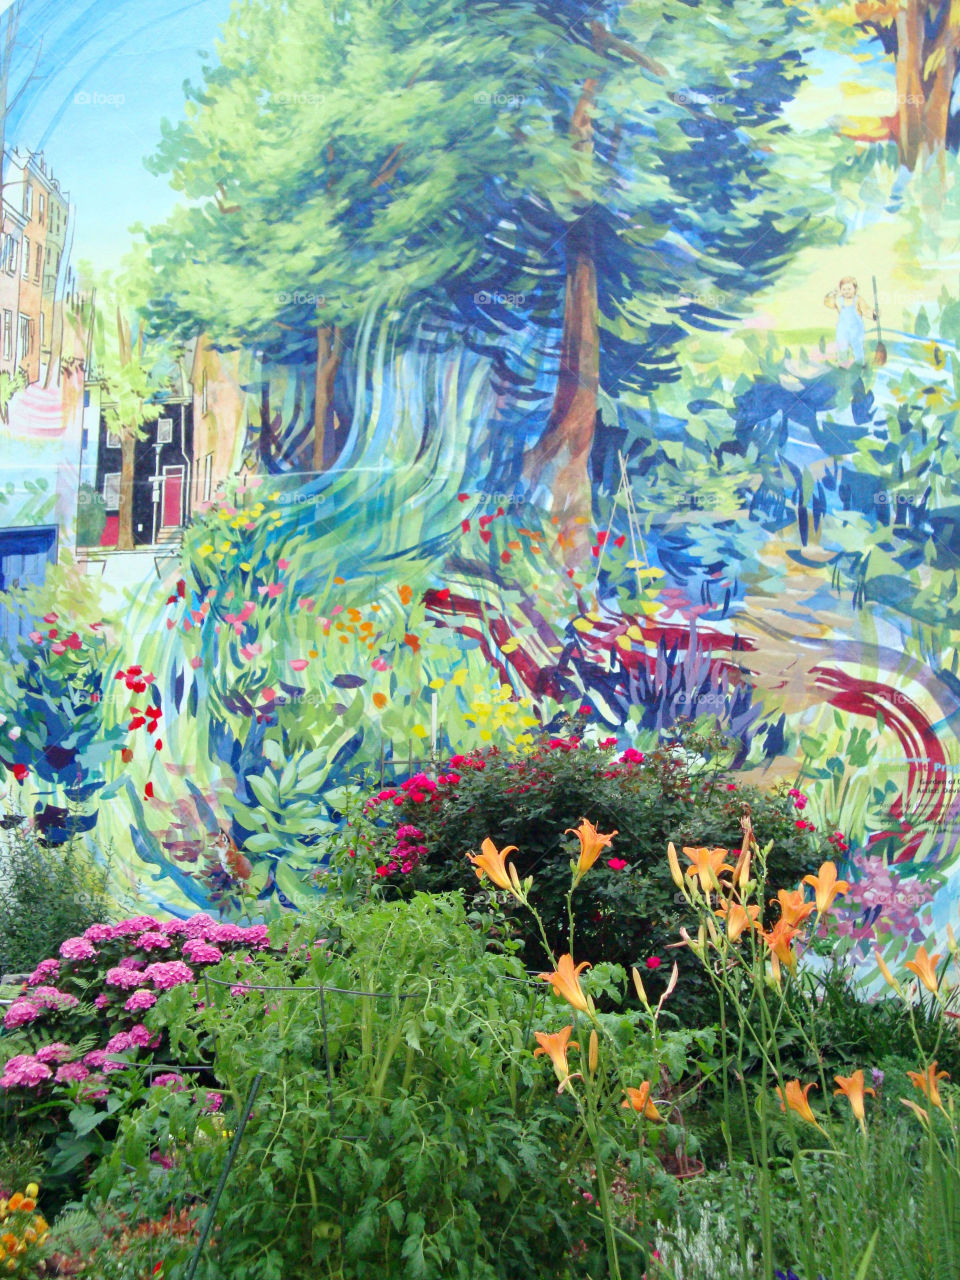 Garden in the garden. One of the most beautiful murals in Philly